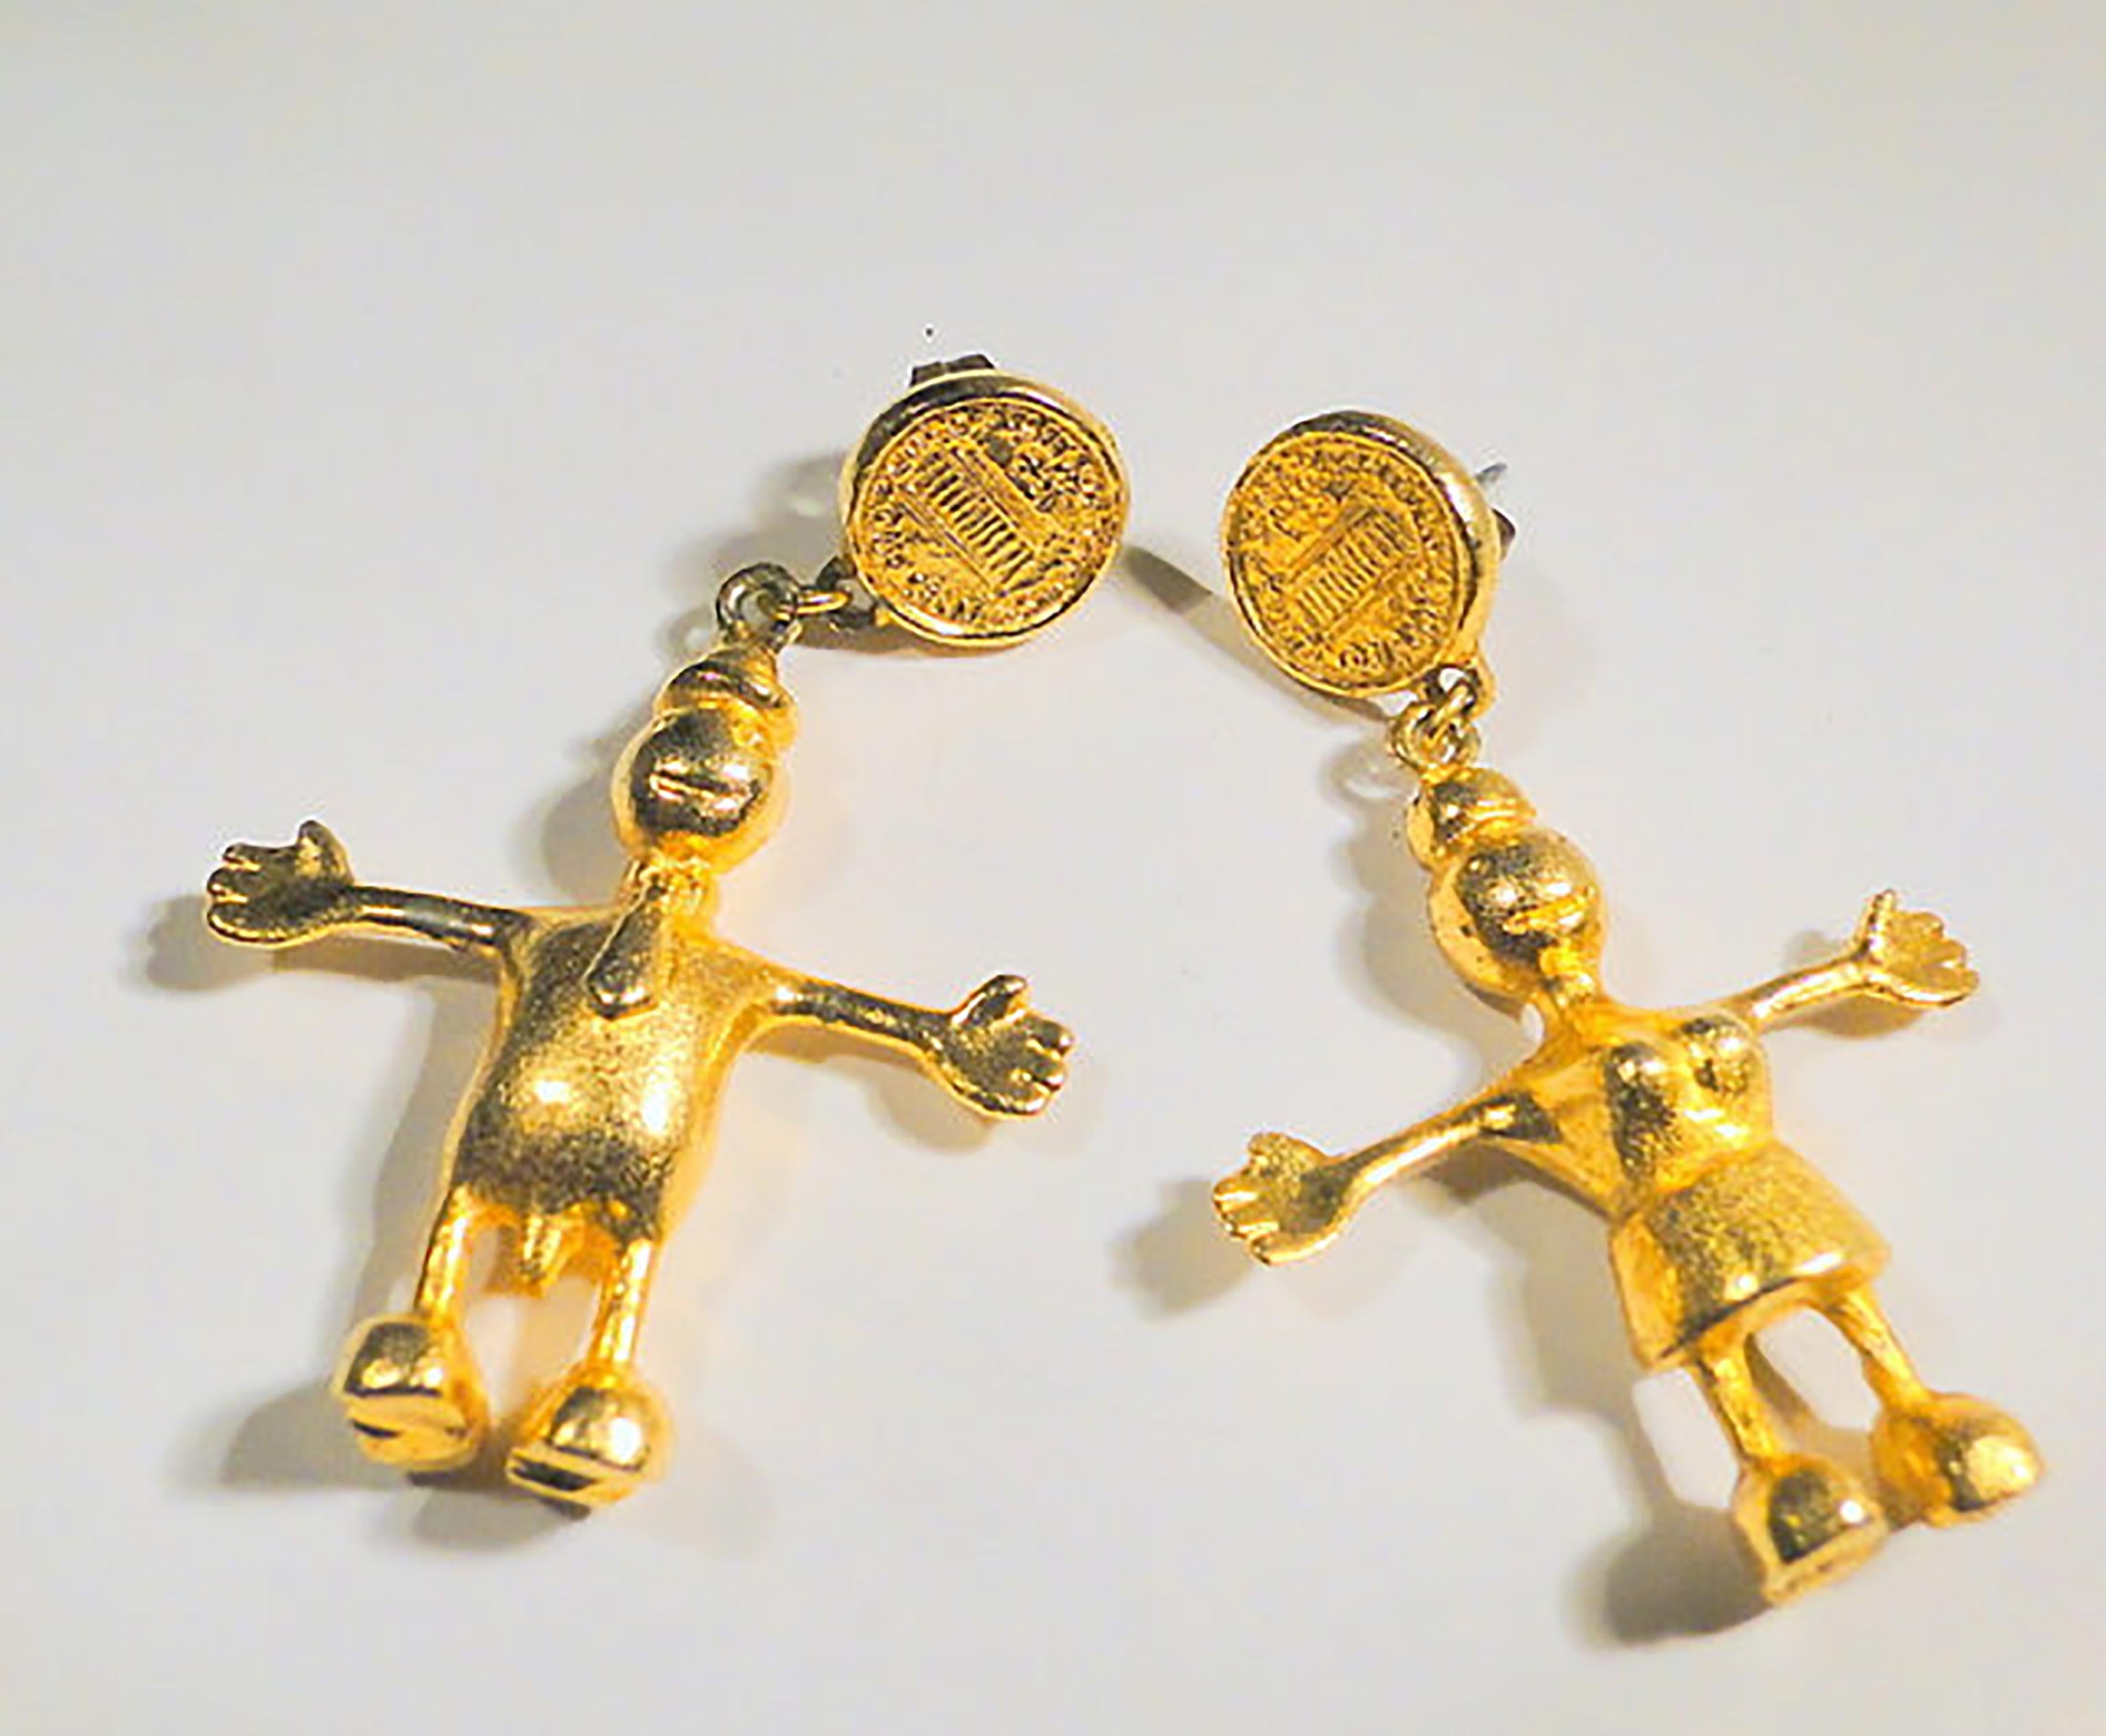 Gold-Plated Earrings - Contemporary Art by Tom Otterness